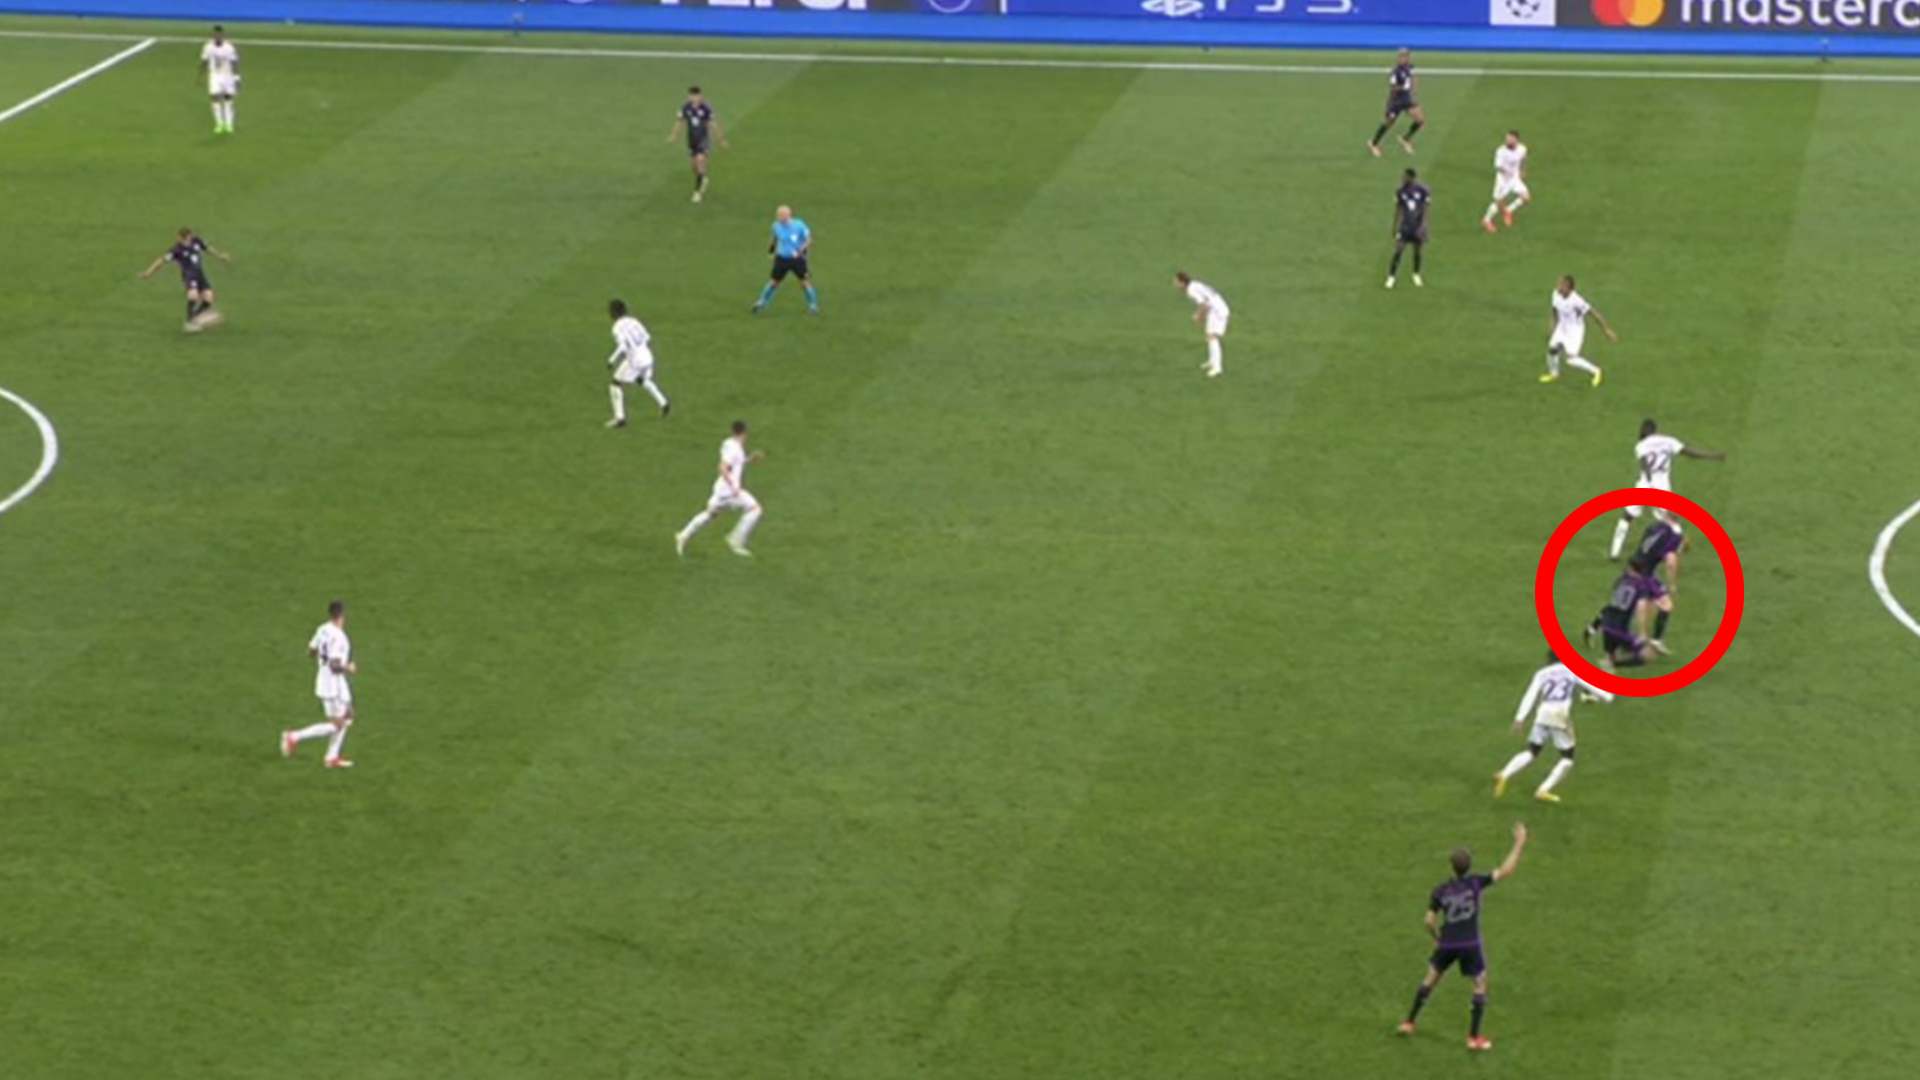 Fans claim Champions League is ‘FIXED’ as Real Madrid vs Bayern ends in major controversy with Germans denied goal [Video]